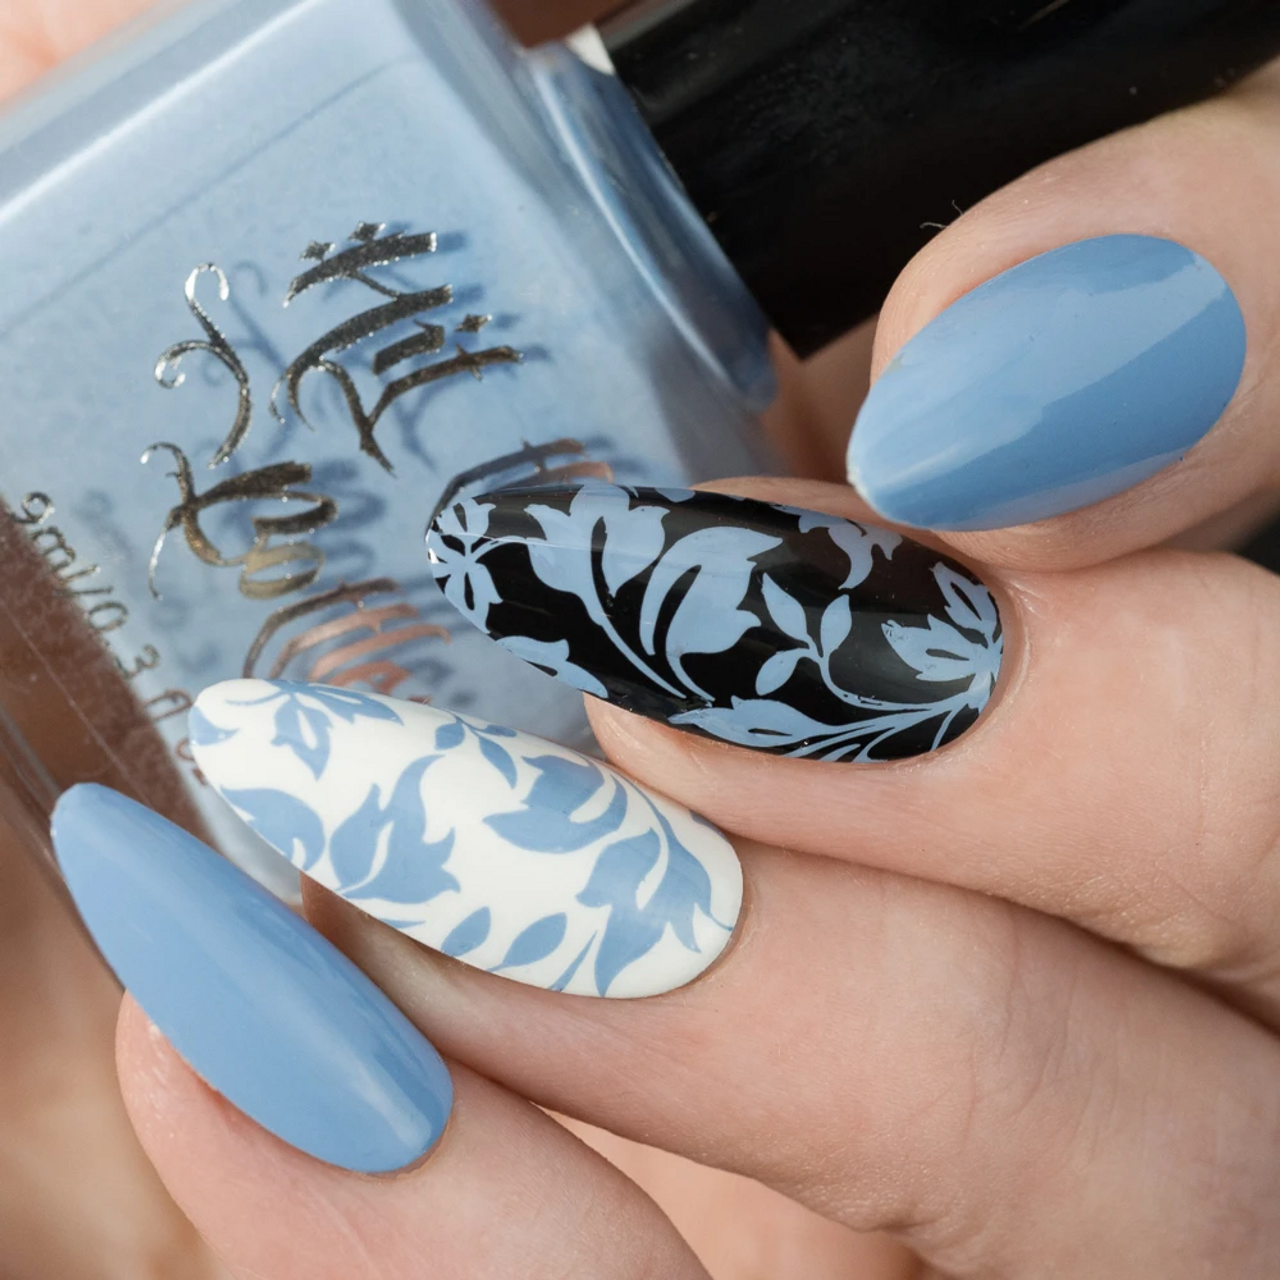 For the Love of Science - Hit the Bottle Nail Stamping Plate